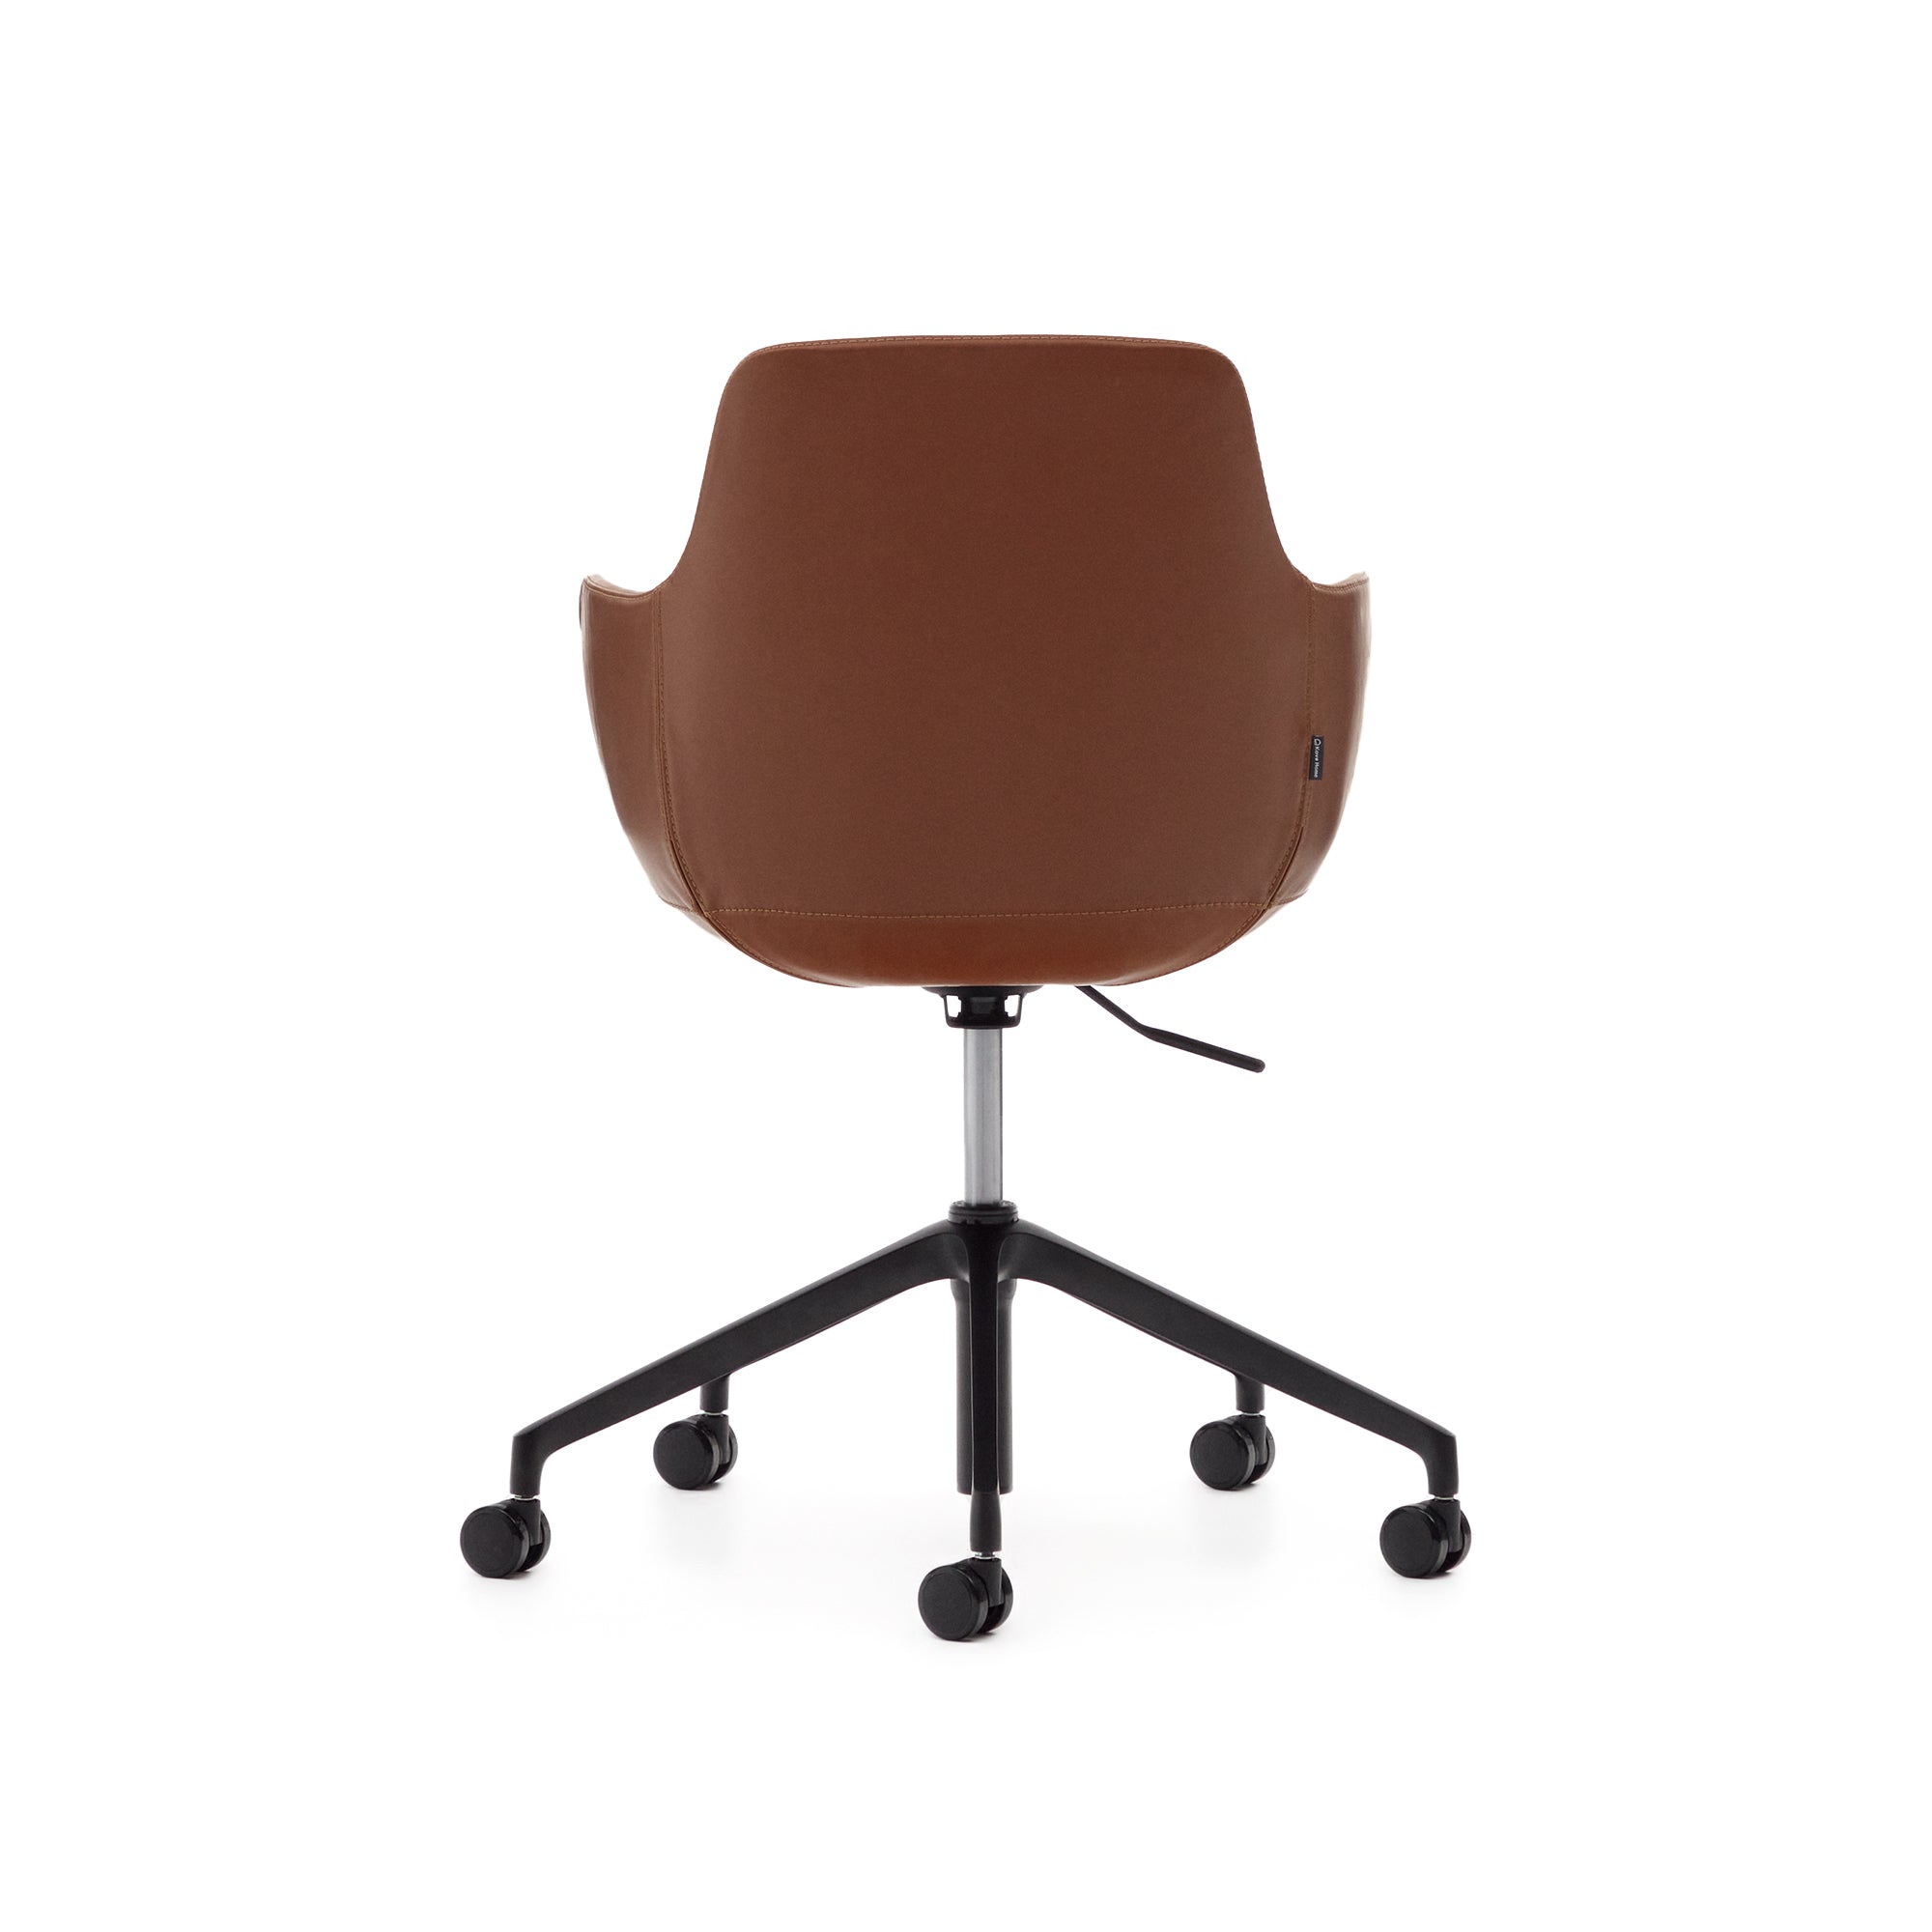 Tissiana desk chair in brown faux leather and aluminium with matte black finish